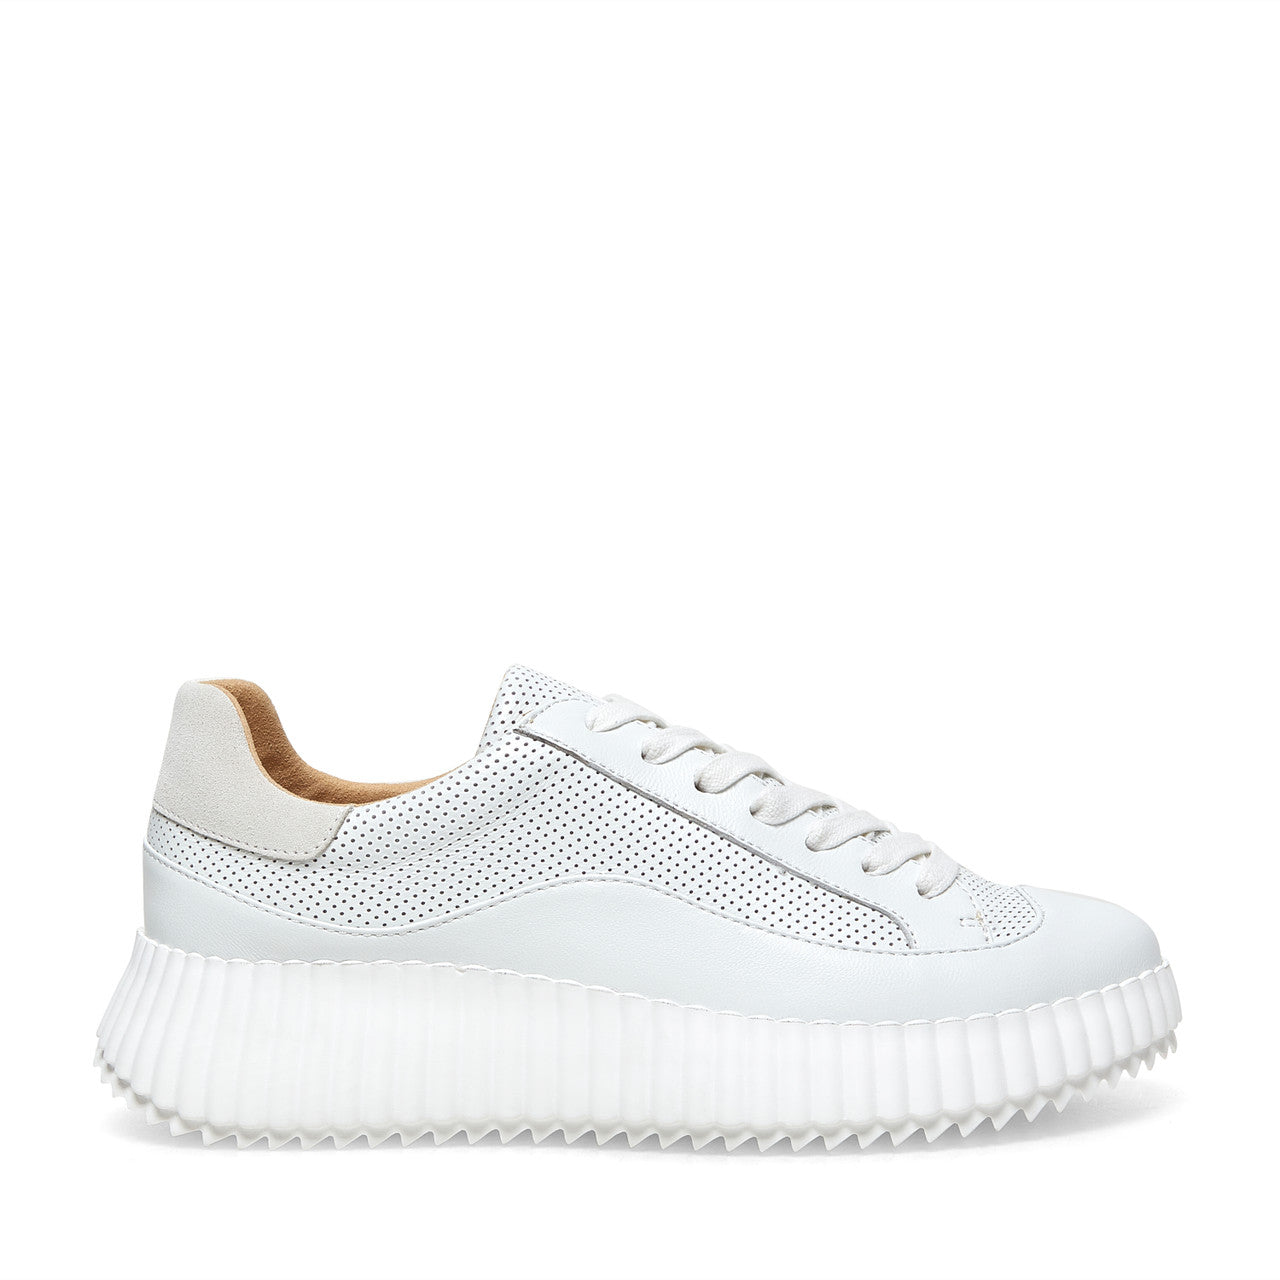 The Perforated Lace Sneaker in White